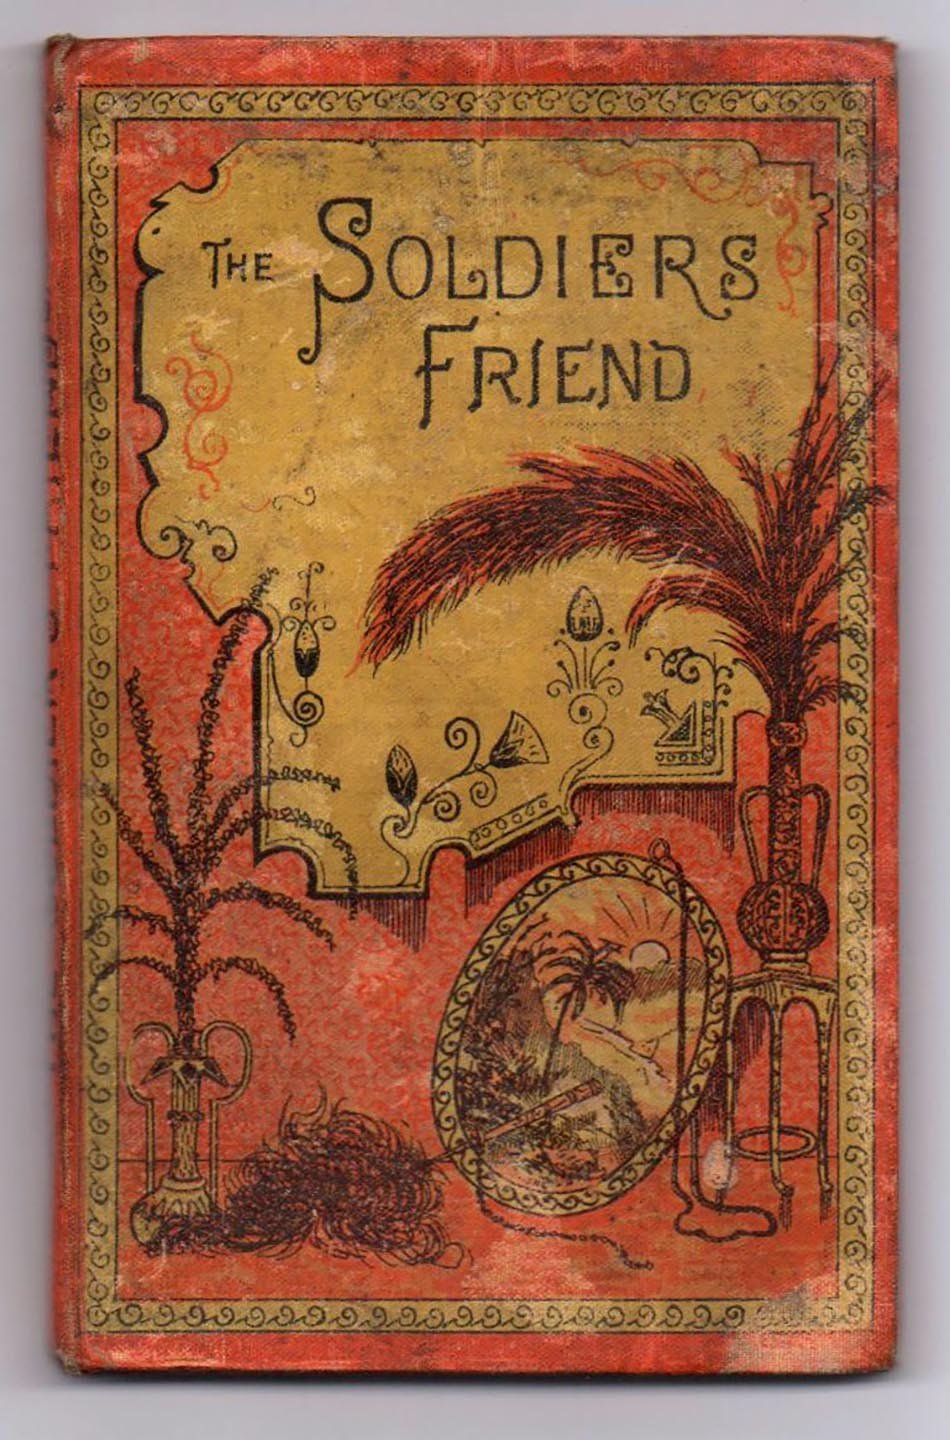 The Soldier's Friend; or The Noble Deeds of a Heroic Woman